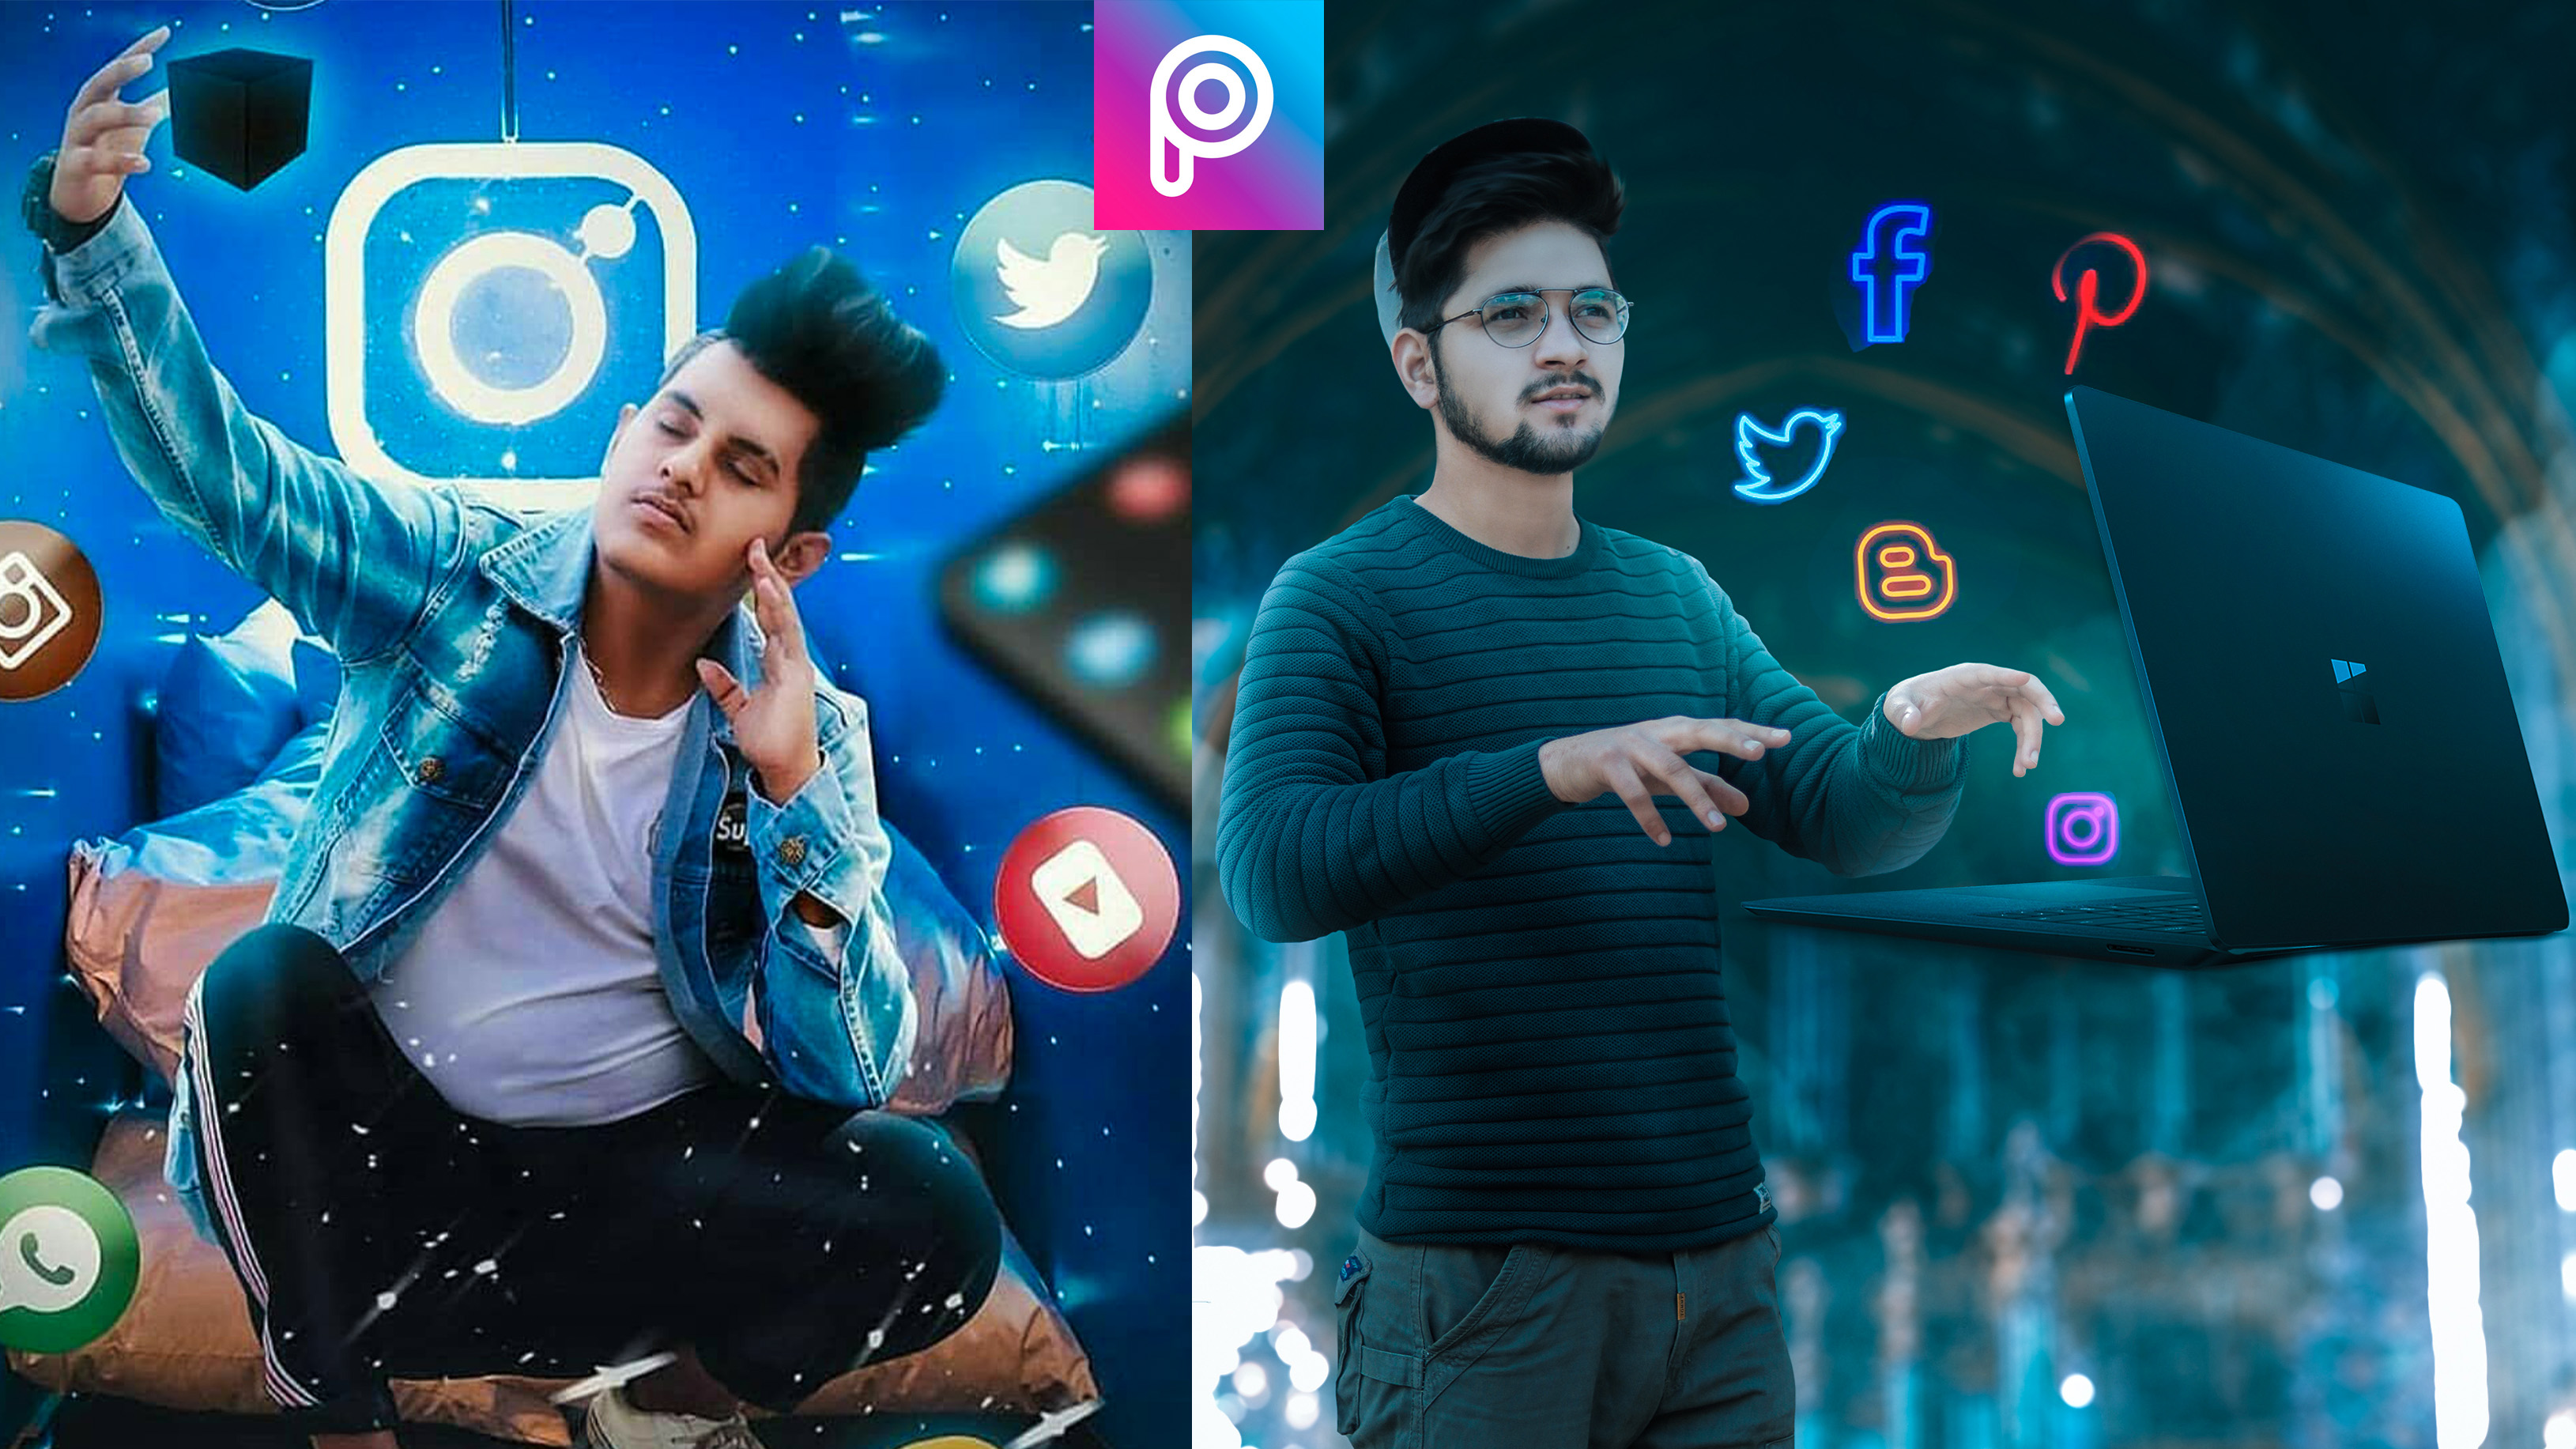 social boy photo editing backgrounds and png download [FULL HD]